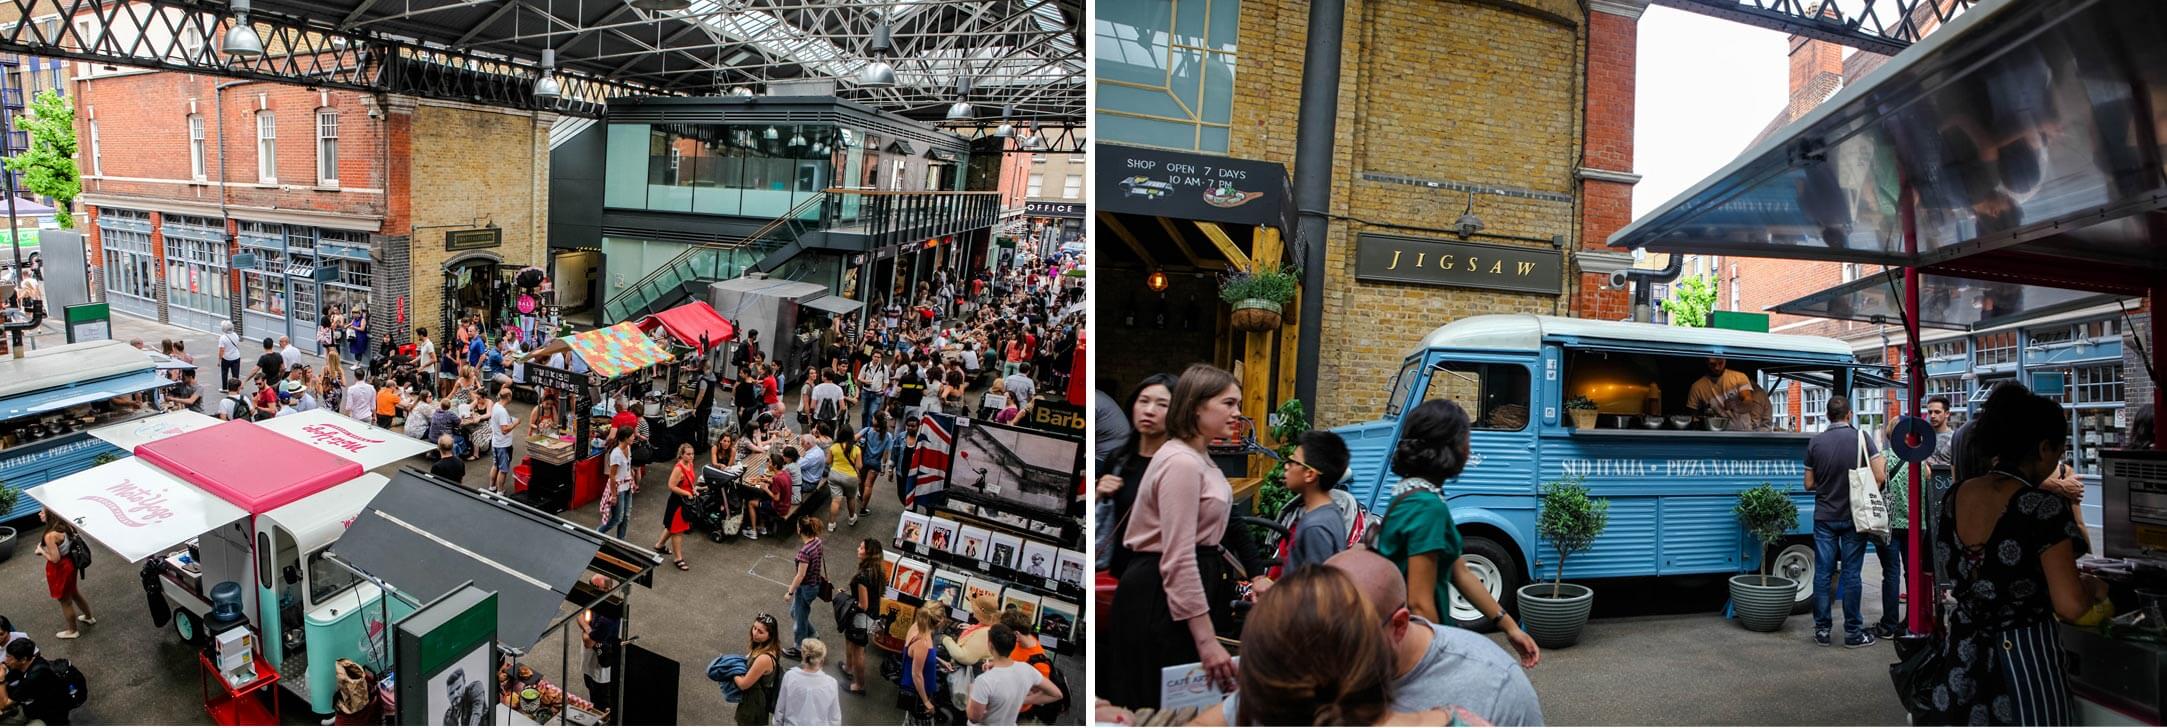 Two views of Spitalsfield Market, one from atop near an entrance, showcasing different stalls, food trucks and architecture, another from the ground level focused on a food truck.